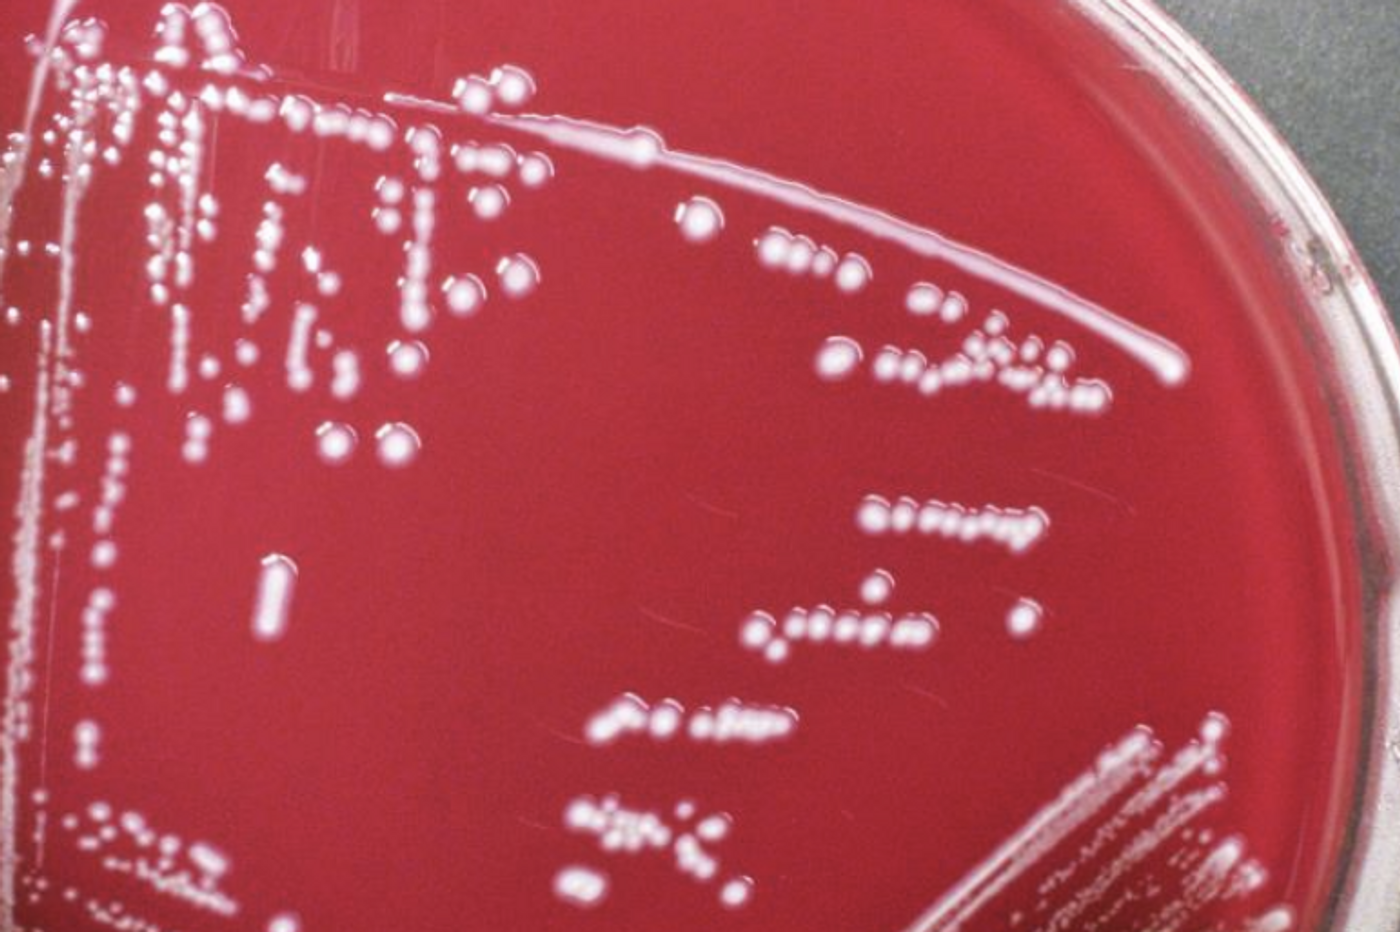  Paenibacillus macerans bacteria cultured on sheep blood agar medium,/ Credit: CDC/ Todd Parker, Ph.D., Assoc Director for Laboratory Science, Div of Preparedness and Emerging Infections at CDC